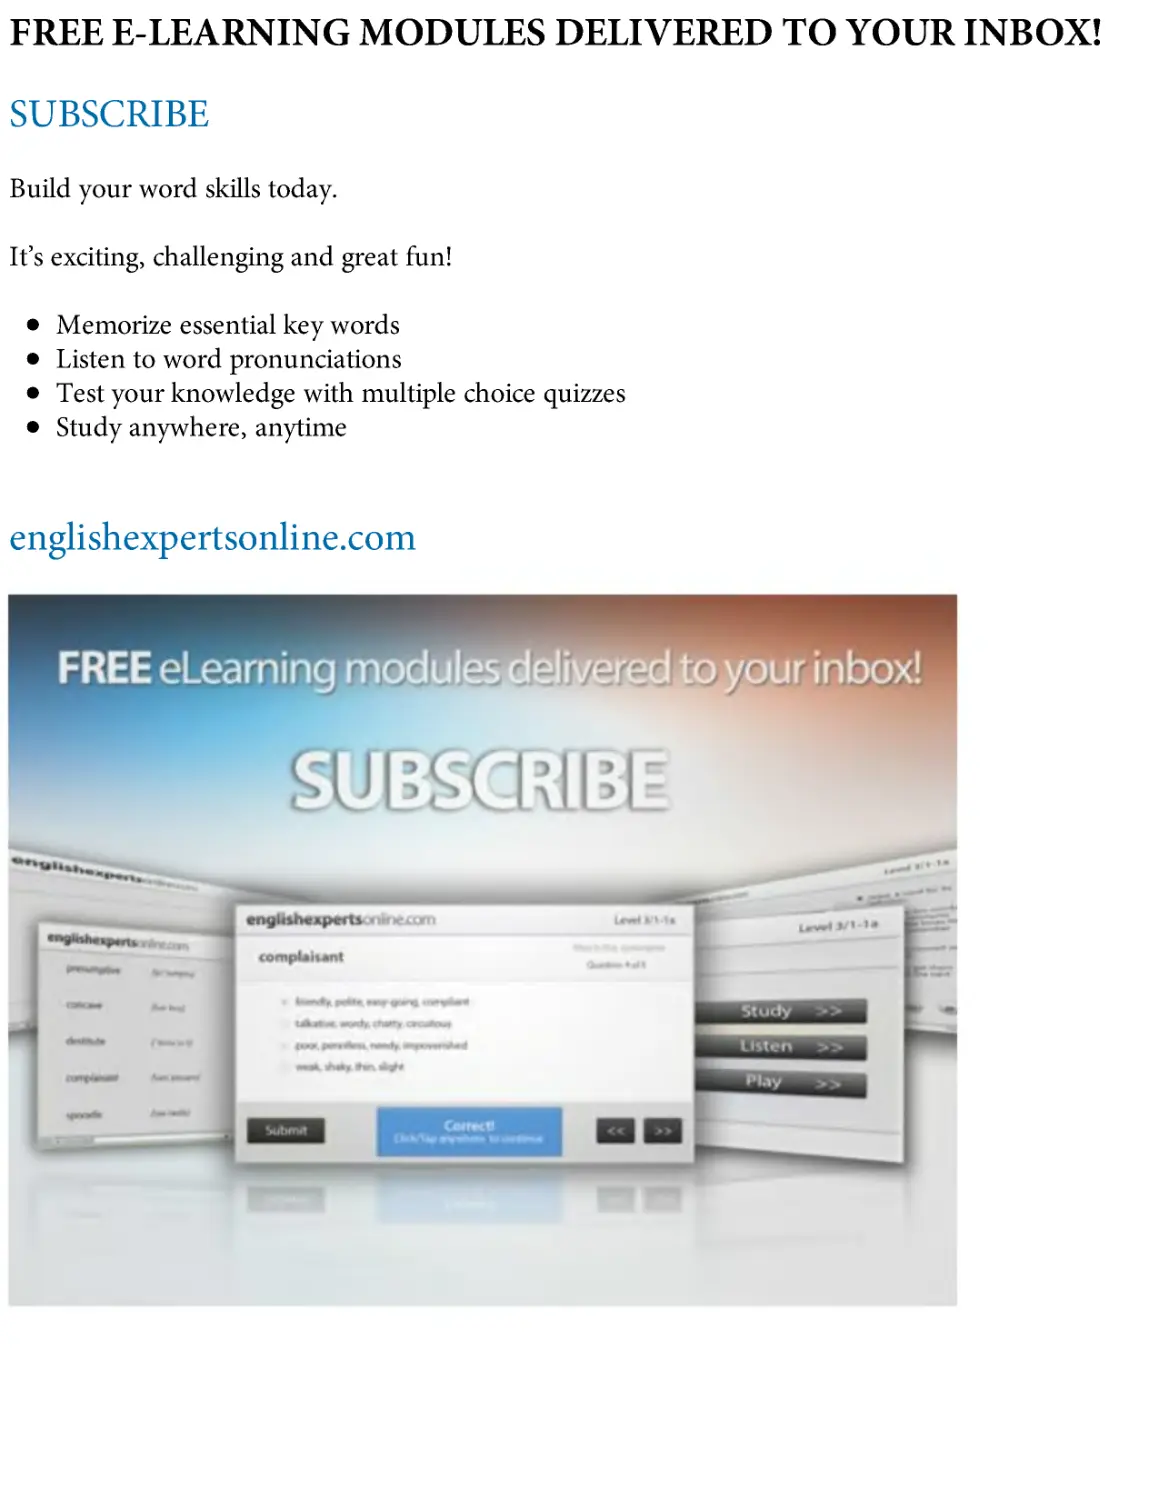 FREE E-LEARNING MODULES DELIVERED TO YOUR INBOX!